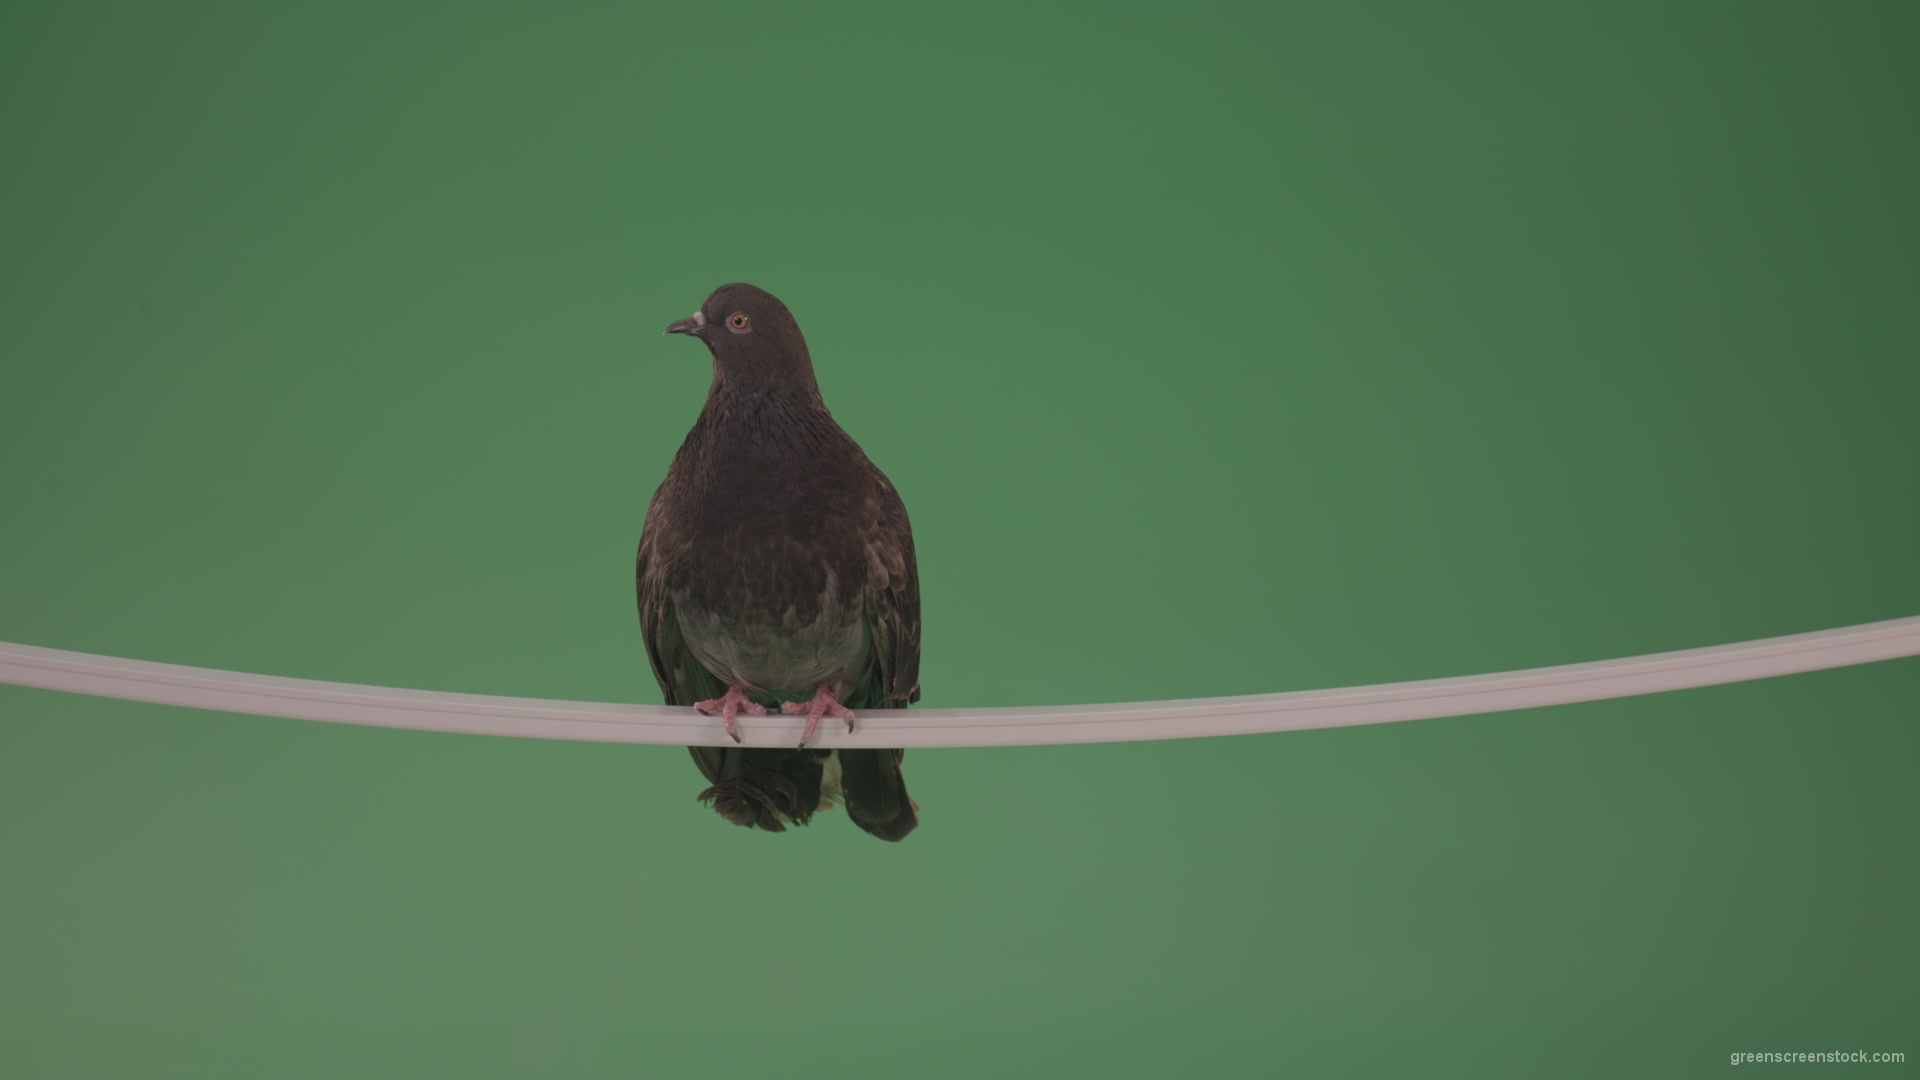 Beautiful-bird-of-doves-flew-to-explore-the-terrain-isolated-on-chromakey-background_009 Green Screen Stock